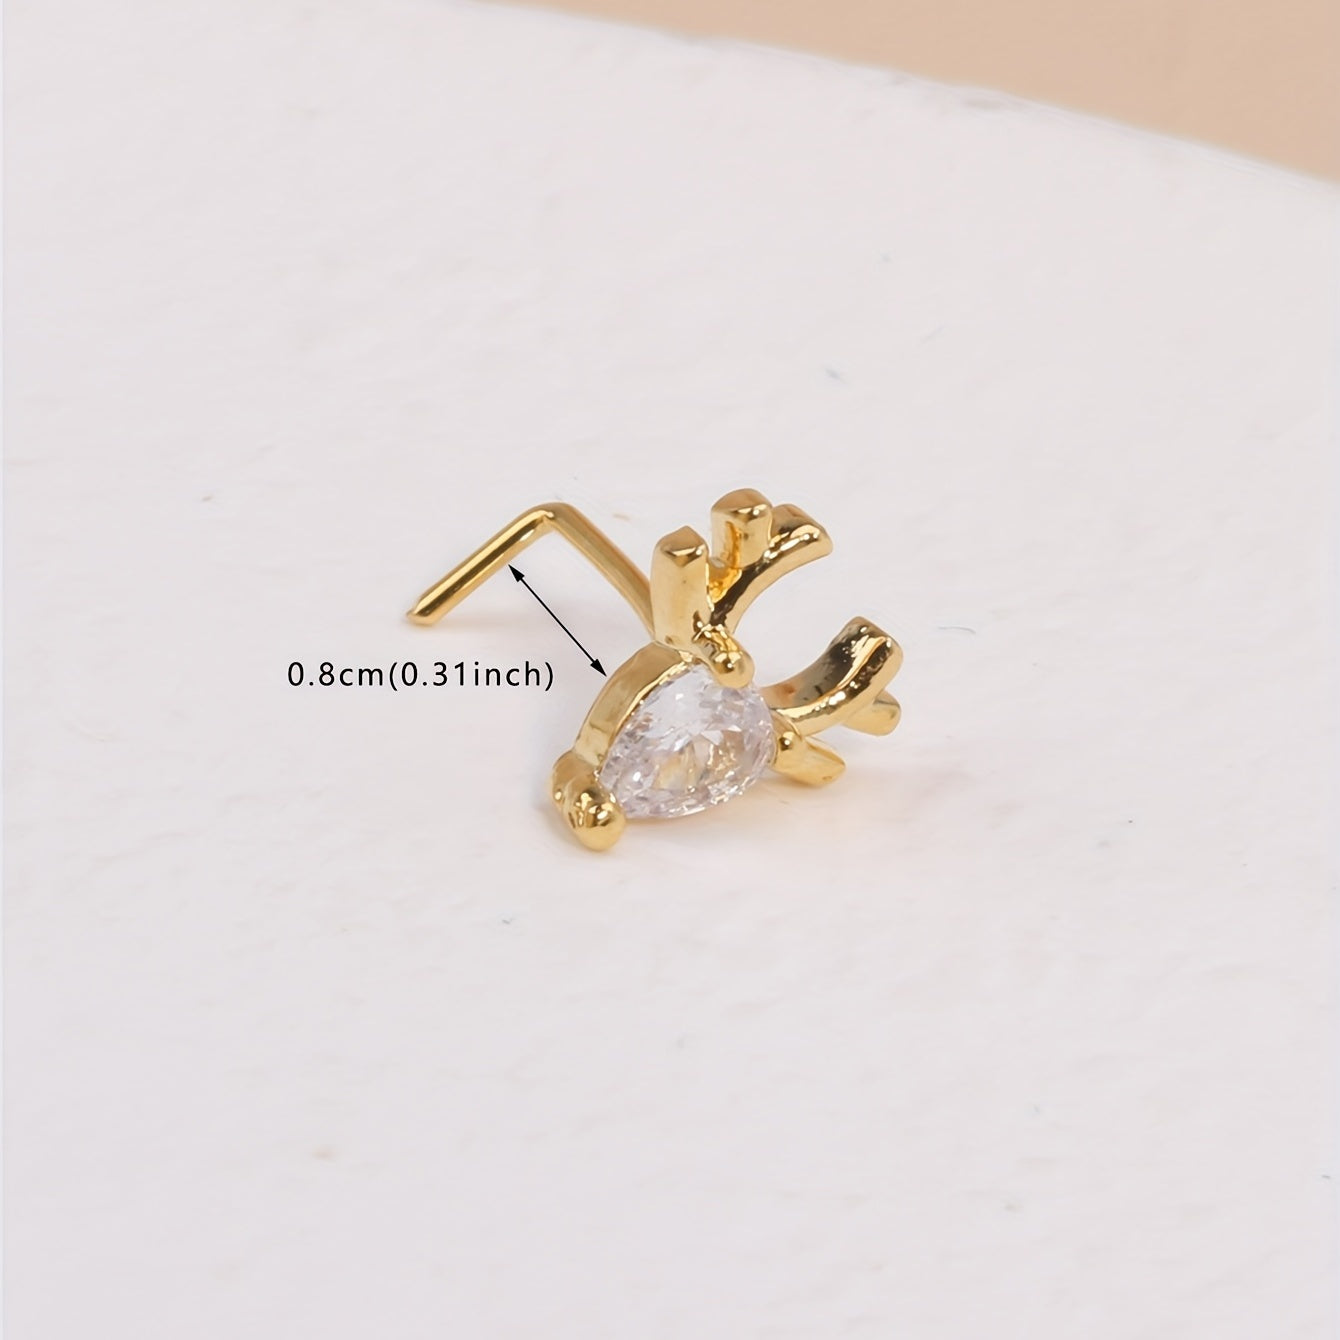 Elk Inlaid Cubic Zirconia L Shaped Nose Ring Stud For Women Festival Gift Body Piercing Jewelry